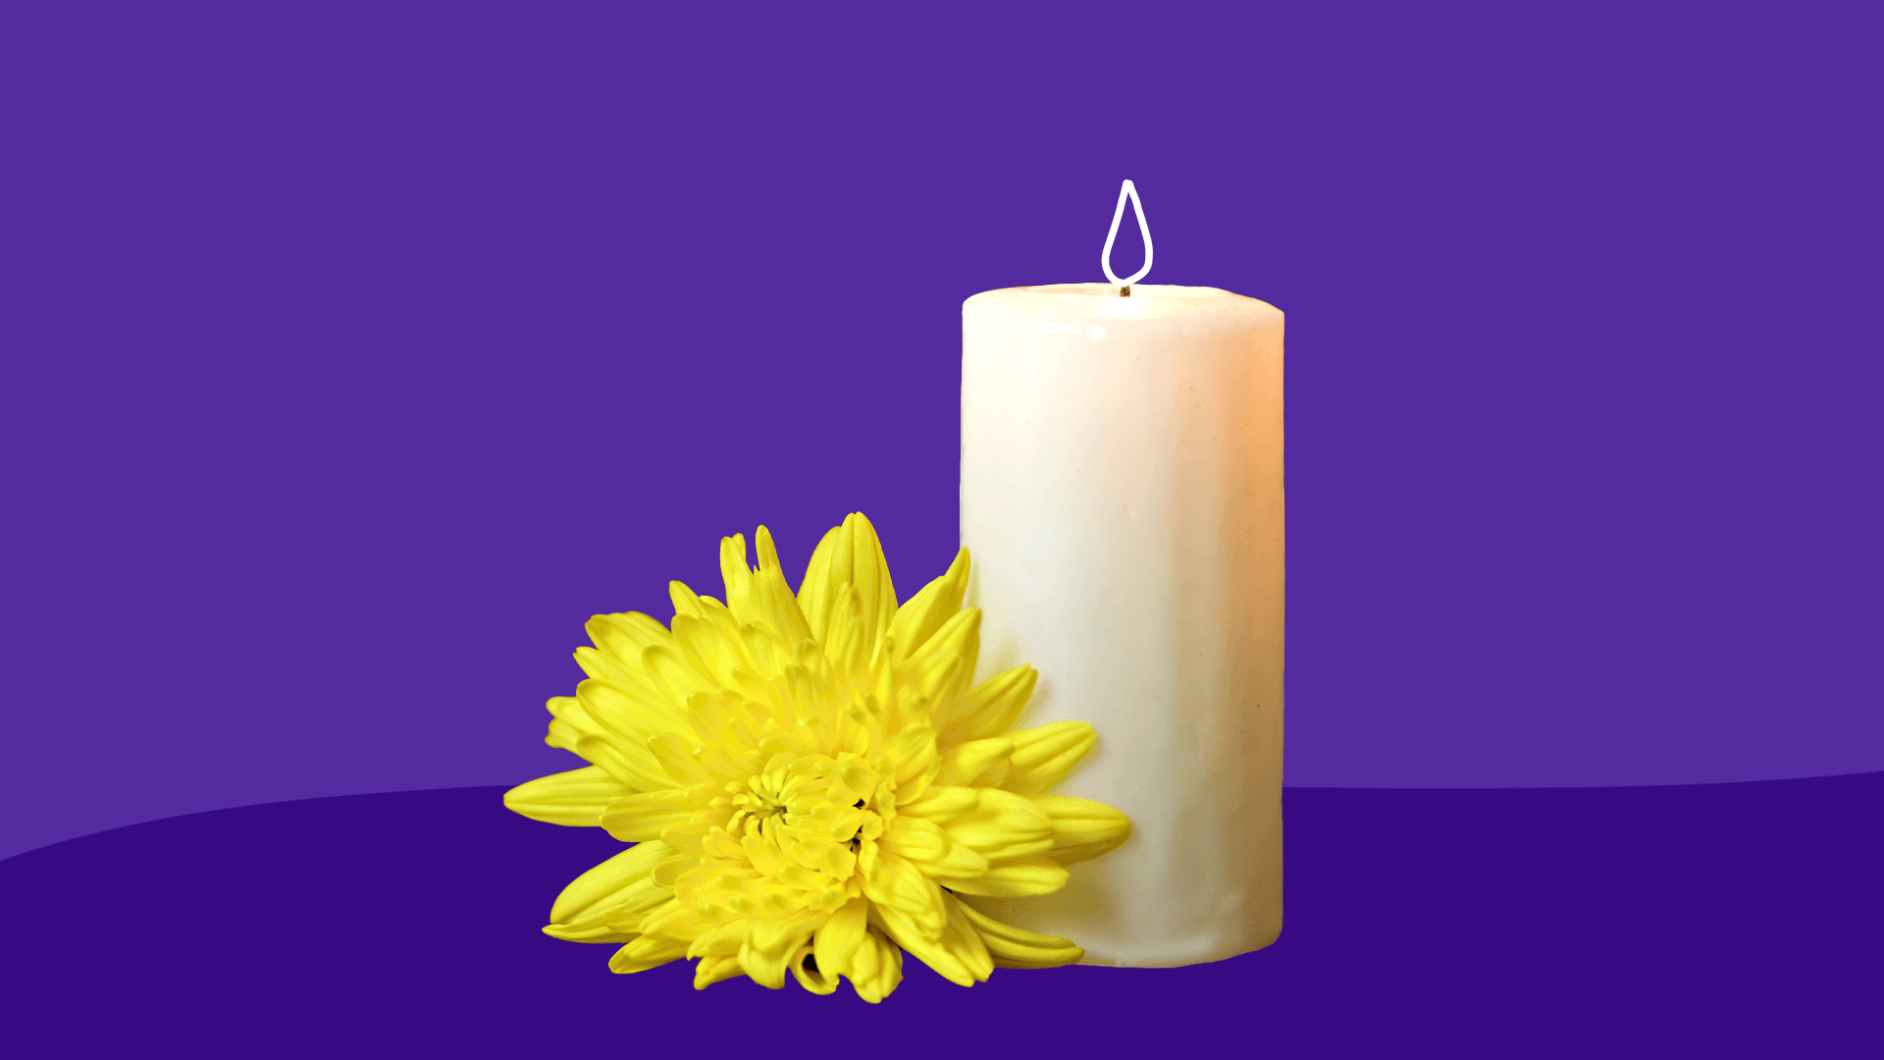 Pillar candle with flower: What is grief and how can you cope?